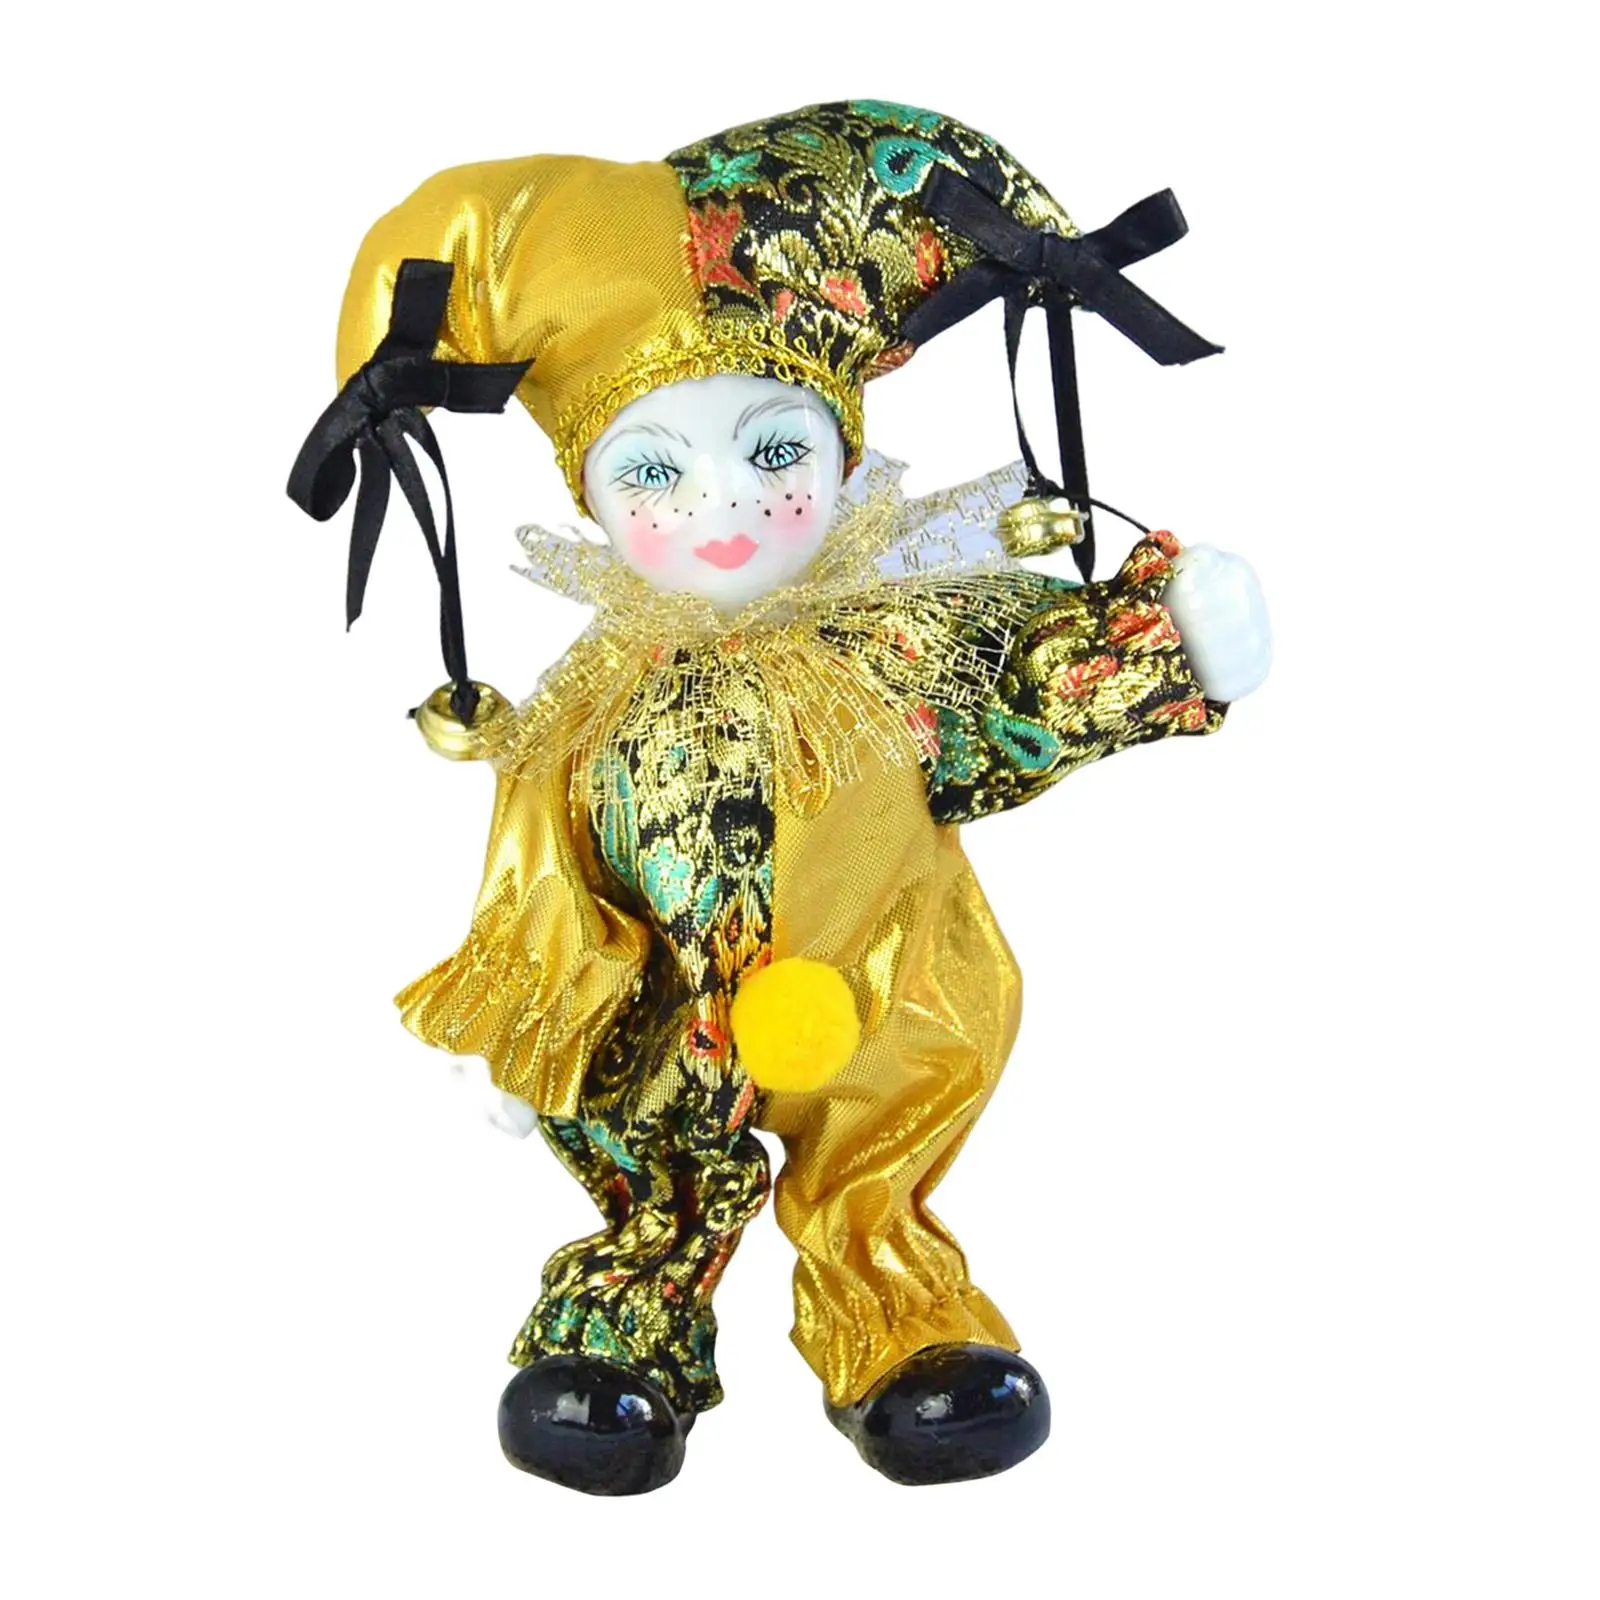 Triangel Doll with Outfits Small Clown Doll Arts for Kids Toy Valentin Gift